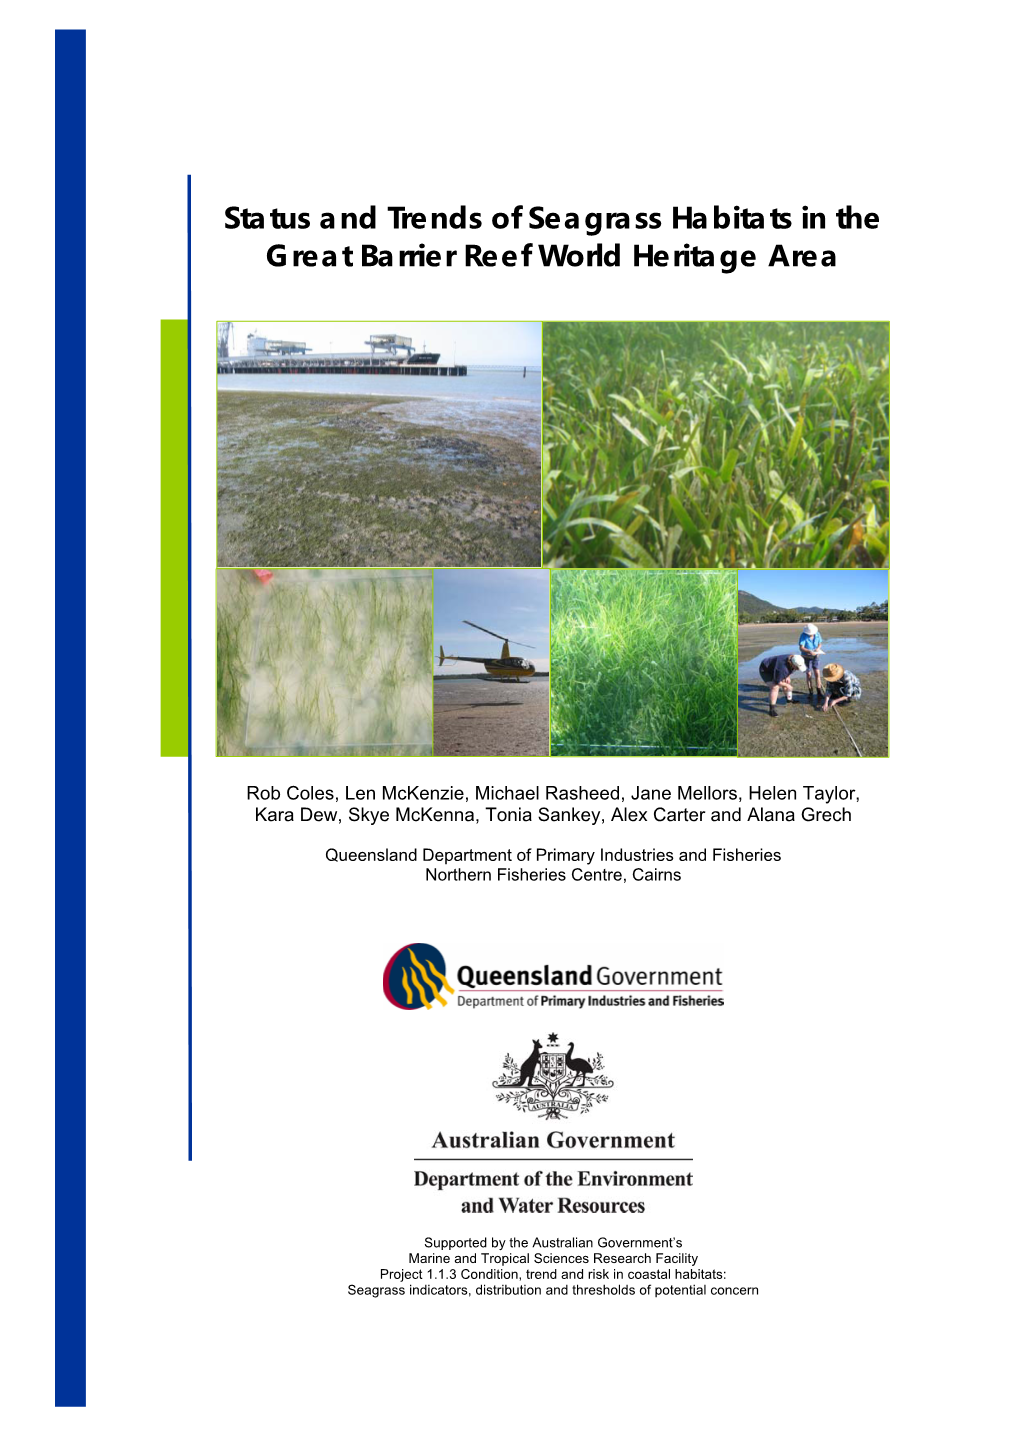 Status and Trends of Seagrass Habitats in the Great Barrier Reef World Heritage Area